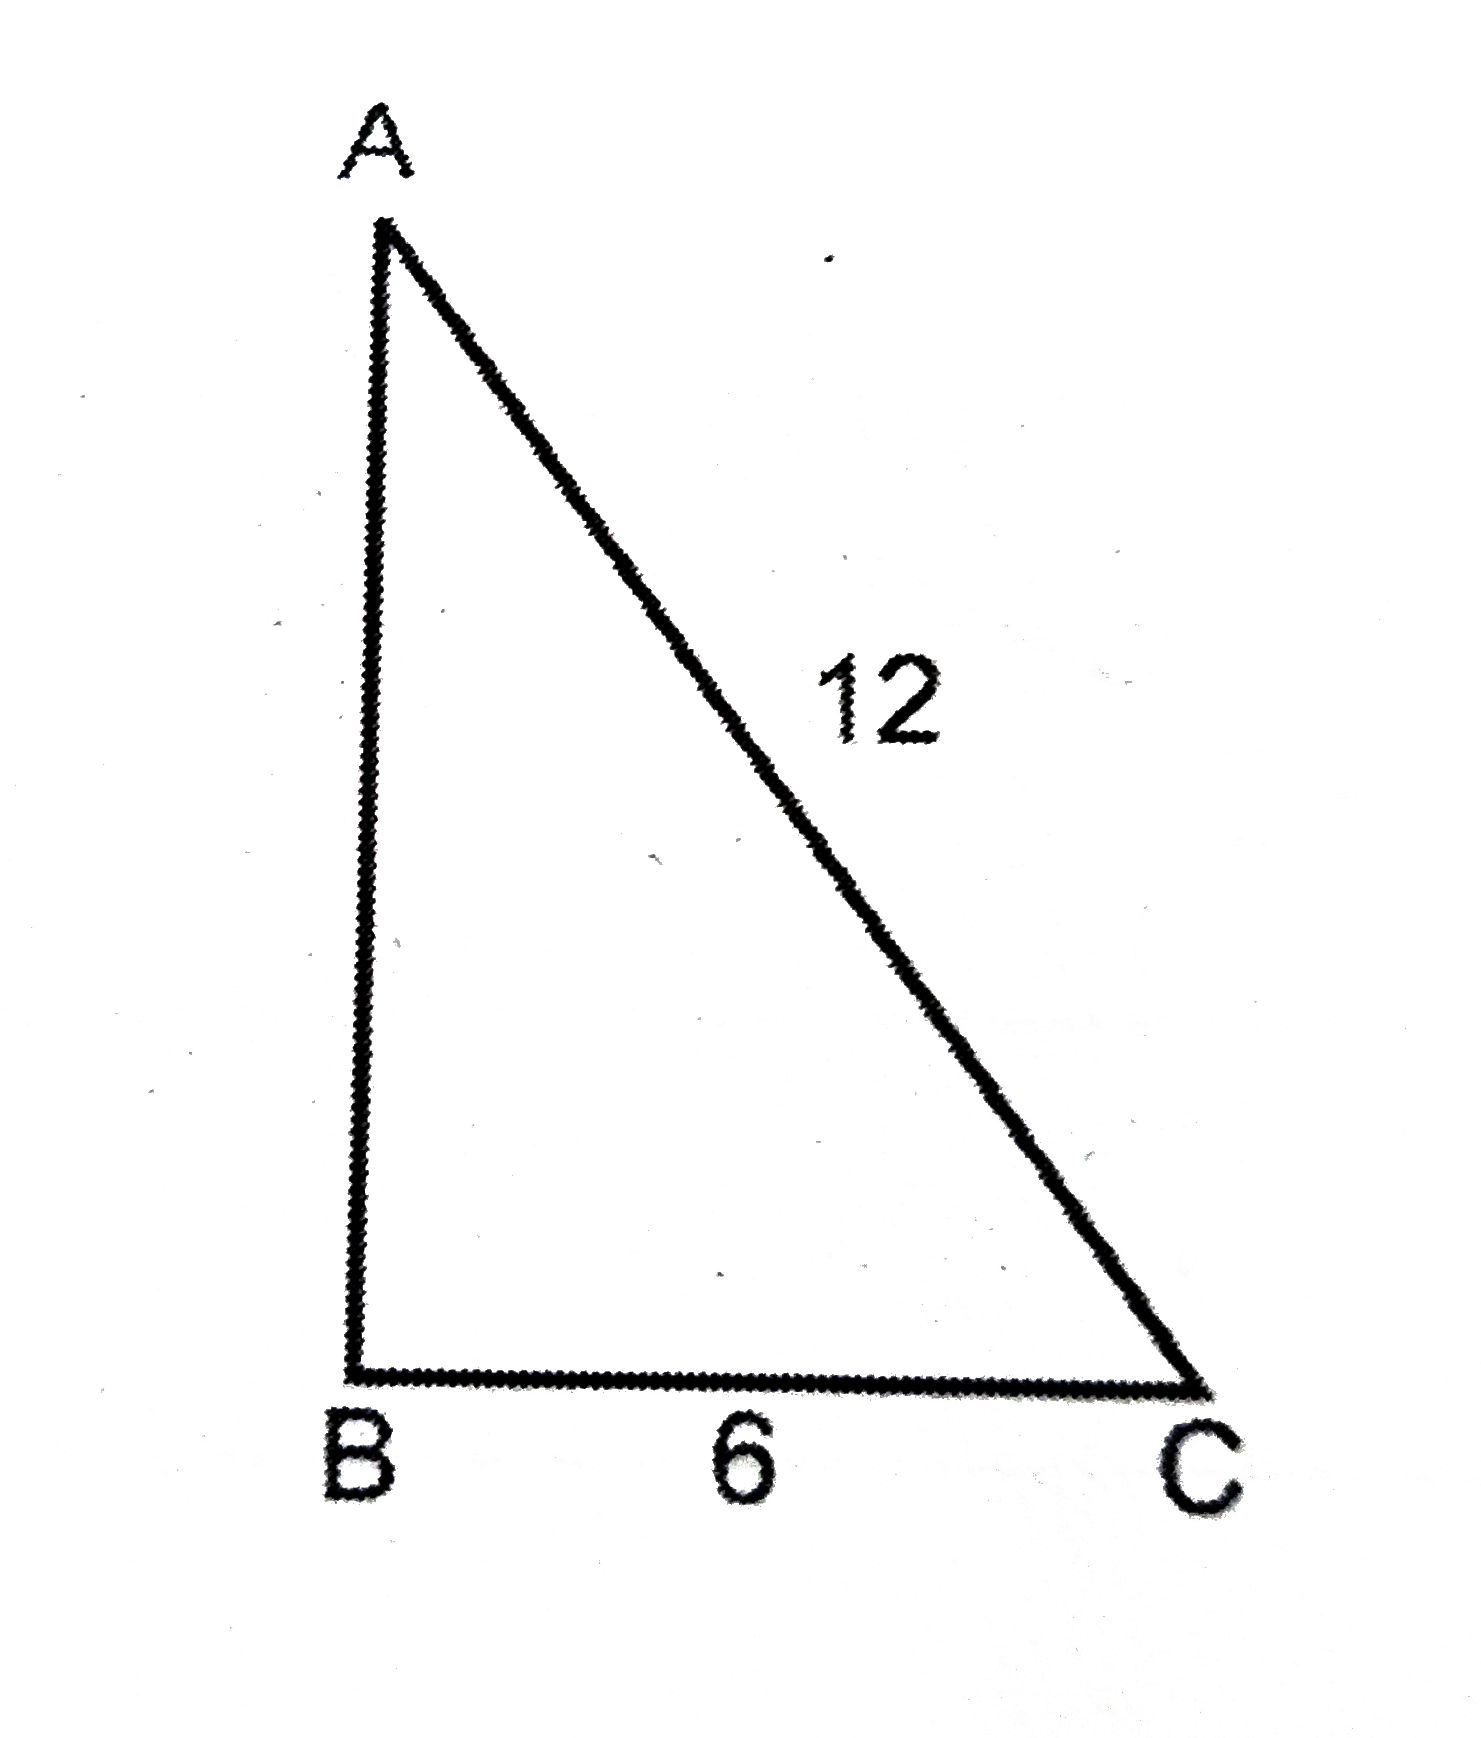 In the figure shown above, ABC is a triangle right angled at B. What is the value of angle A, in degrees?